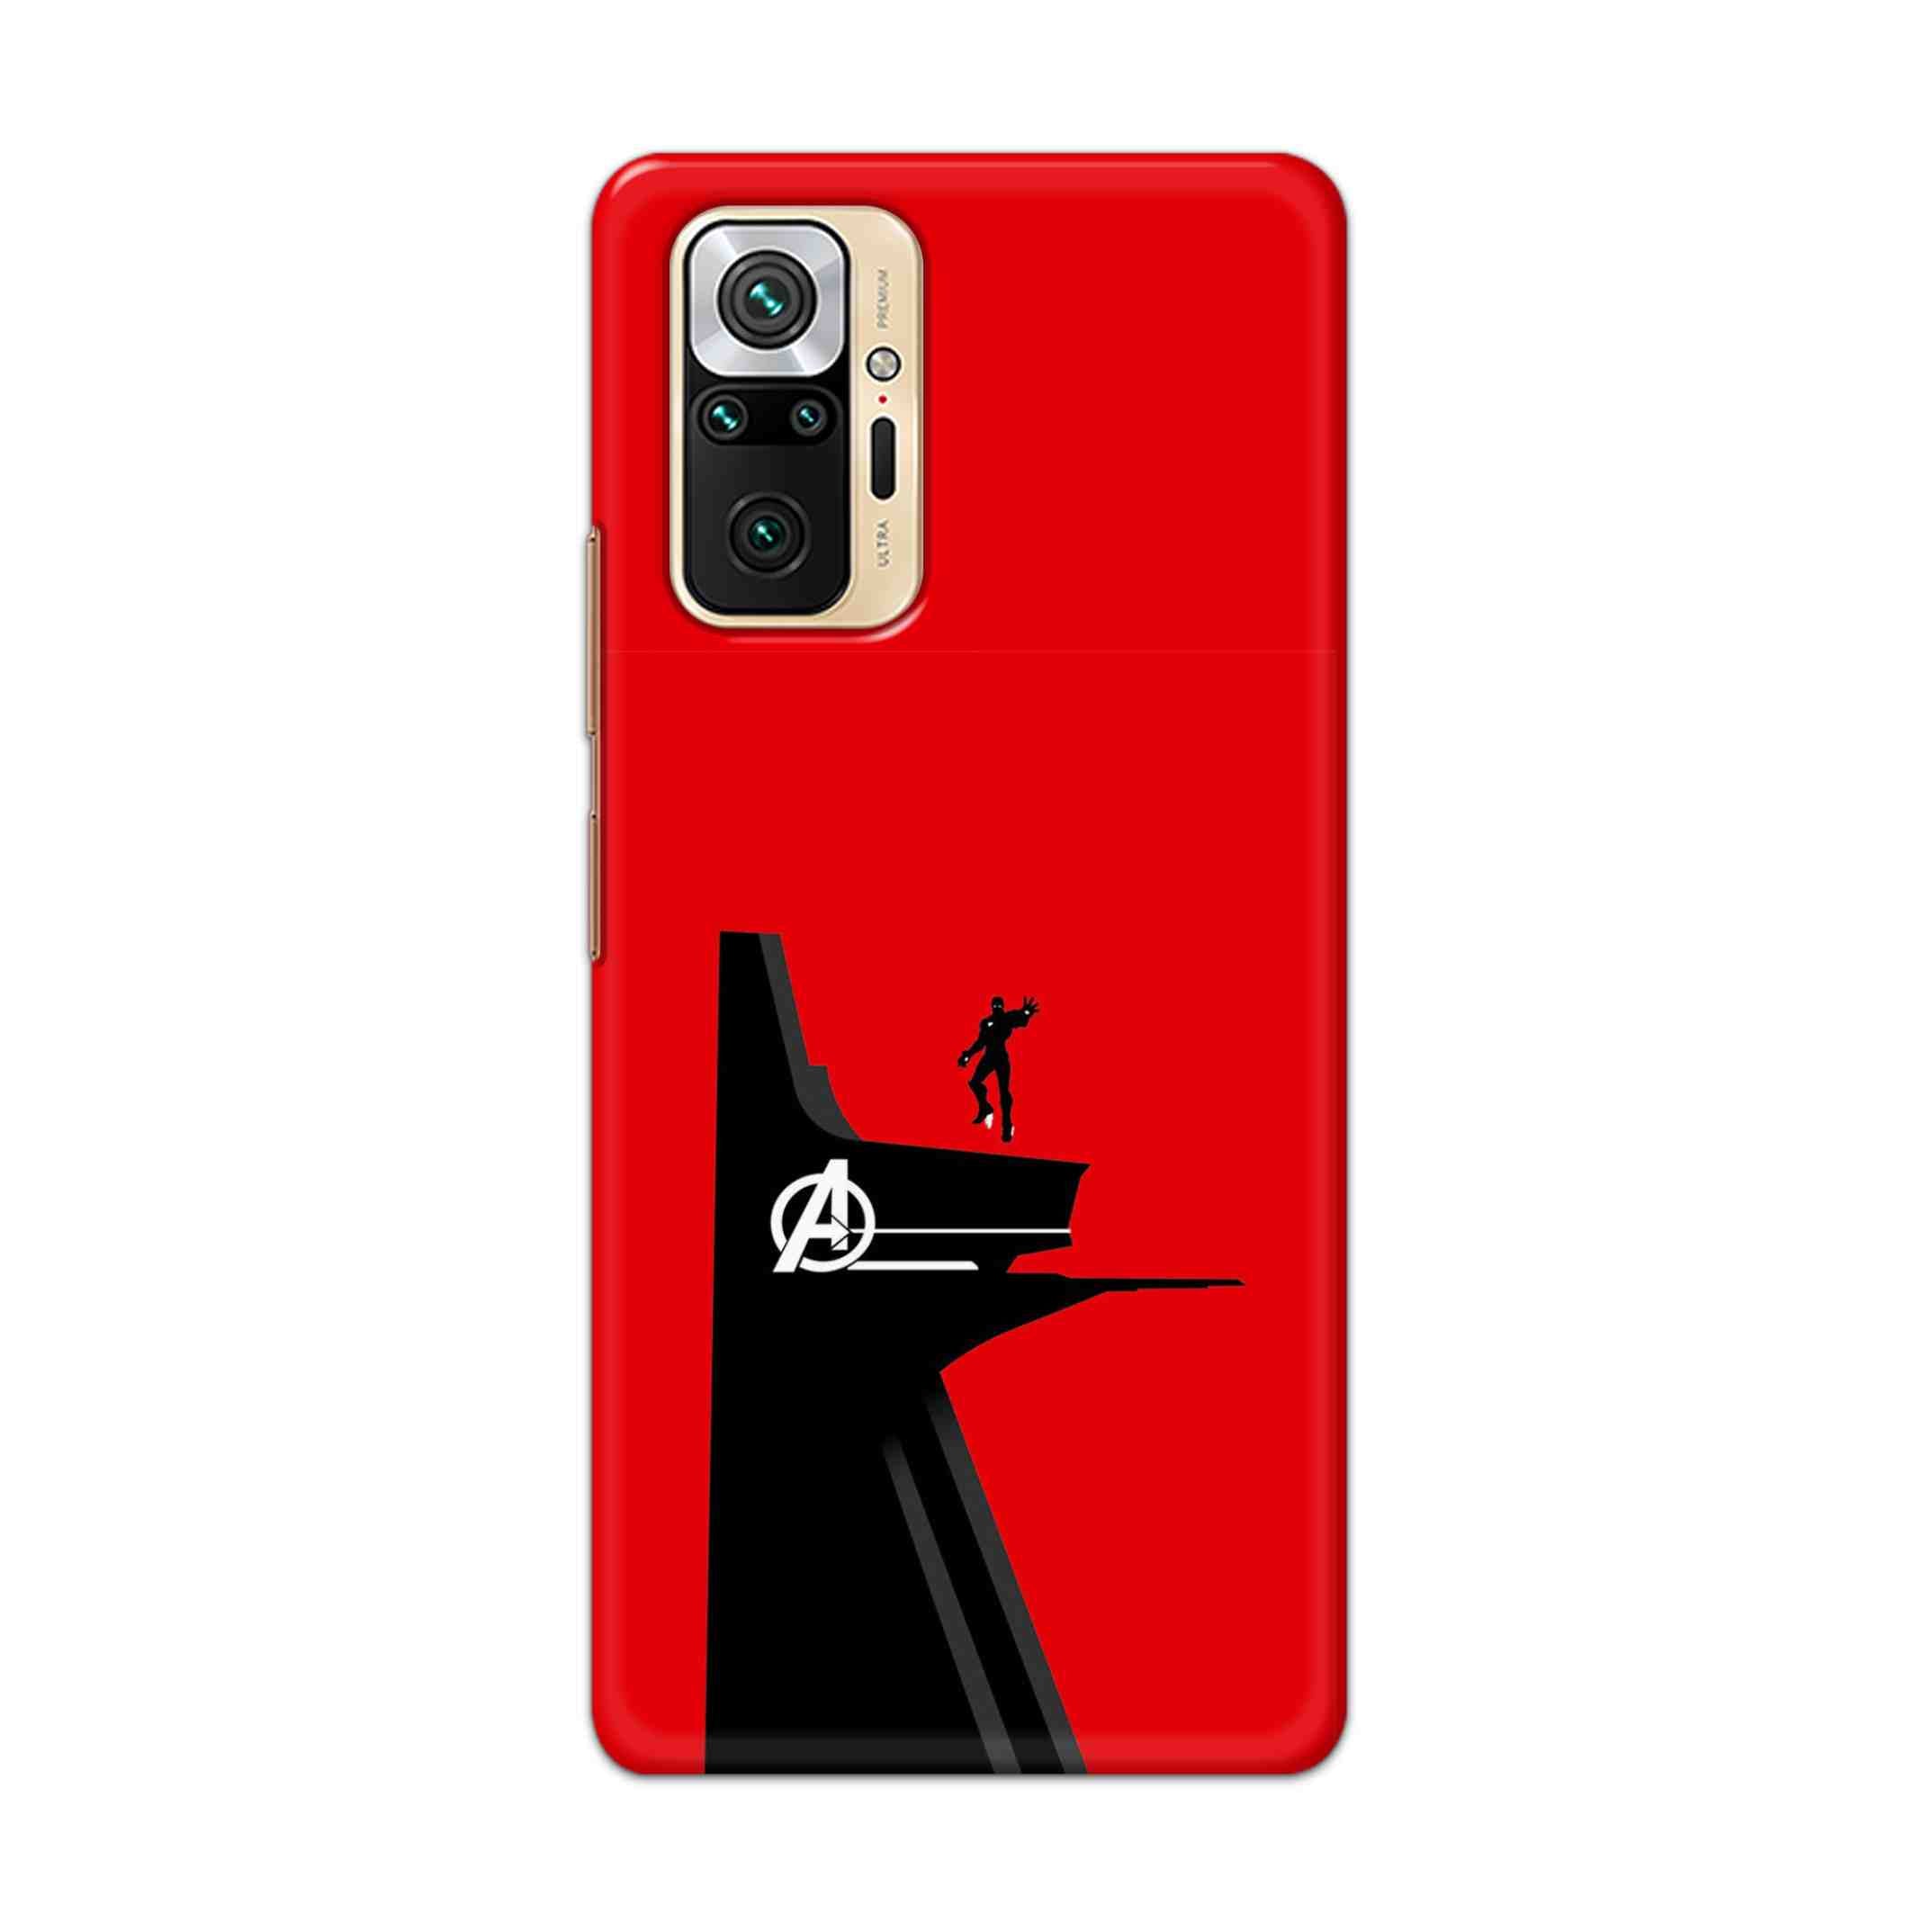 Buy Iron Man Hard Back Mobile Phone Case Cover For Redmi Note 10 Pro Online